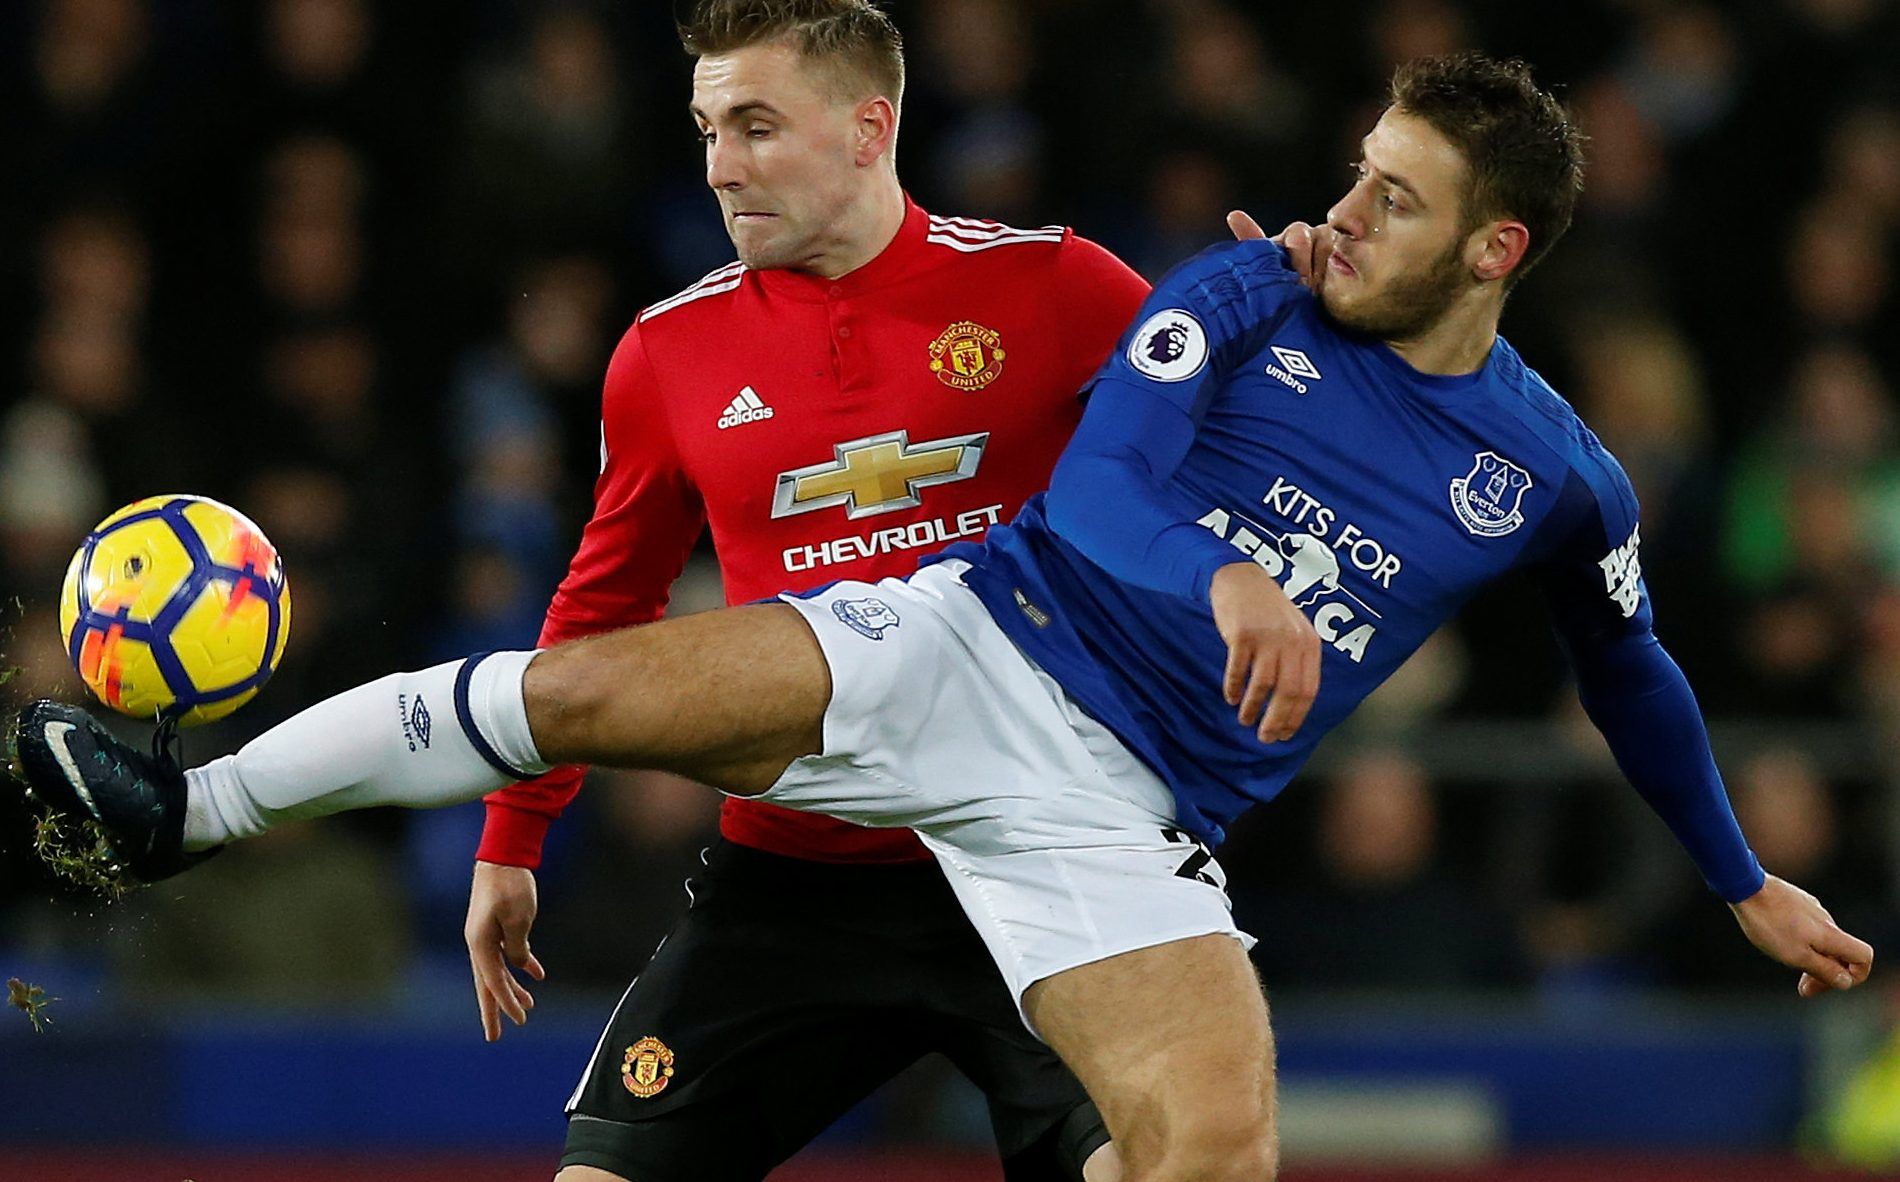 Soccer Football - Premier League - Everton vs Manchester United - Goodison Park, Liverpool, Britain - January 1, 2018   Everton's Nikola Vlasic in action with Manchester United's Luke Shaw    REUTERS/Andrew Yates    EDITORIAL USE ONLY. No use with unauthorized audio, video, data, fixture lists, club/league logos or 